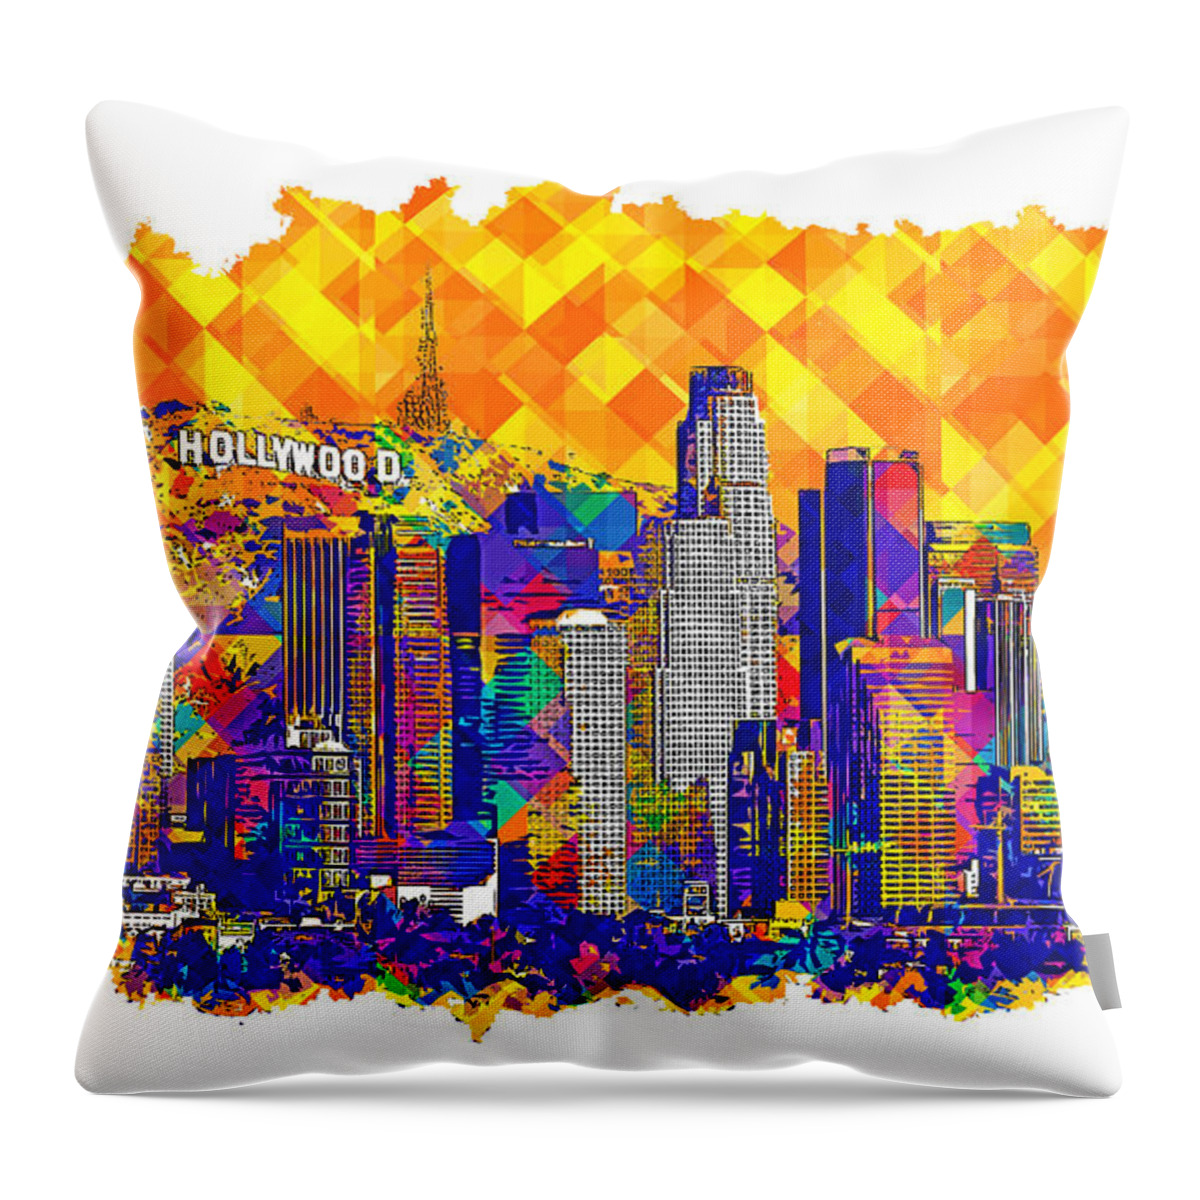 Los Angeles Throw Pillow featuring the digital art Downtown Los Angeles skyline with the Hollywood sign in the background - colorful digital painting by Nicko Prints